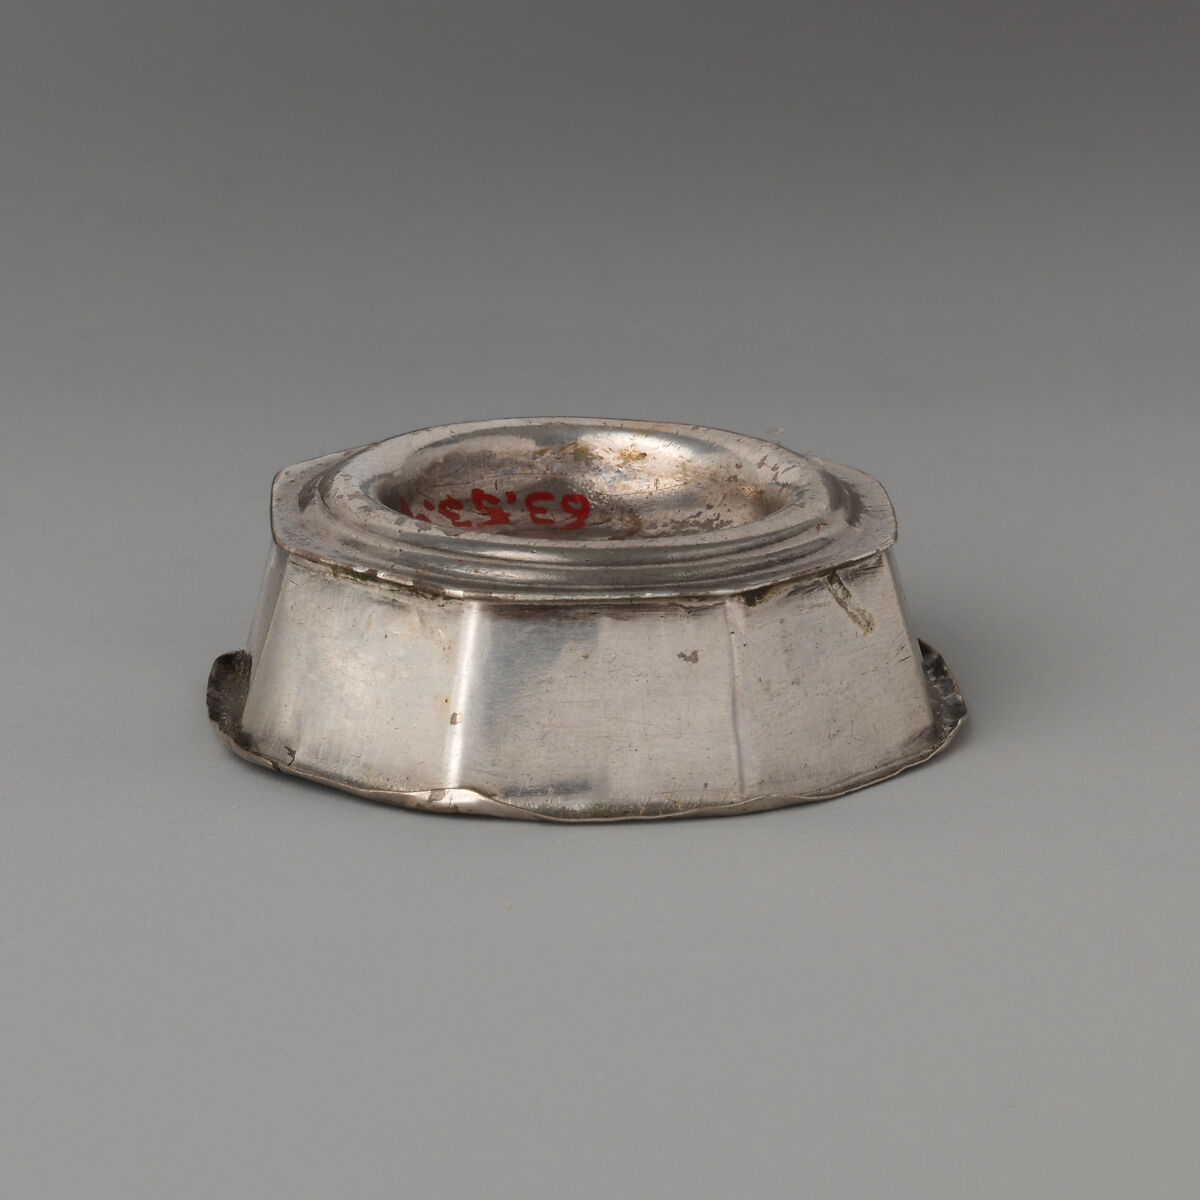 Miniature salt trencher, Possibly by George Middleton (British, 1660–1745), Silver, British, London 